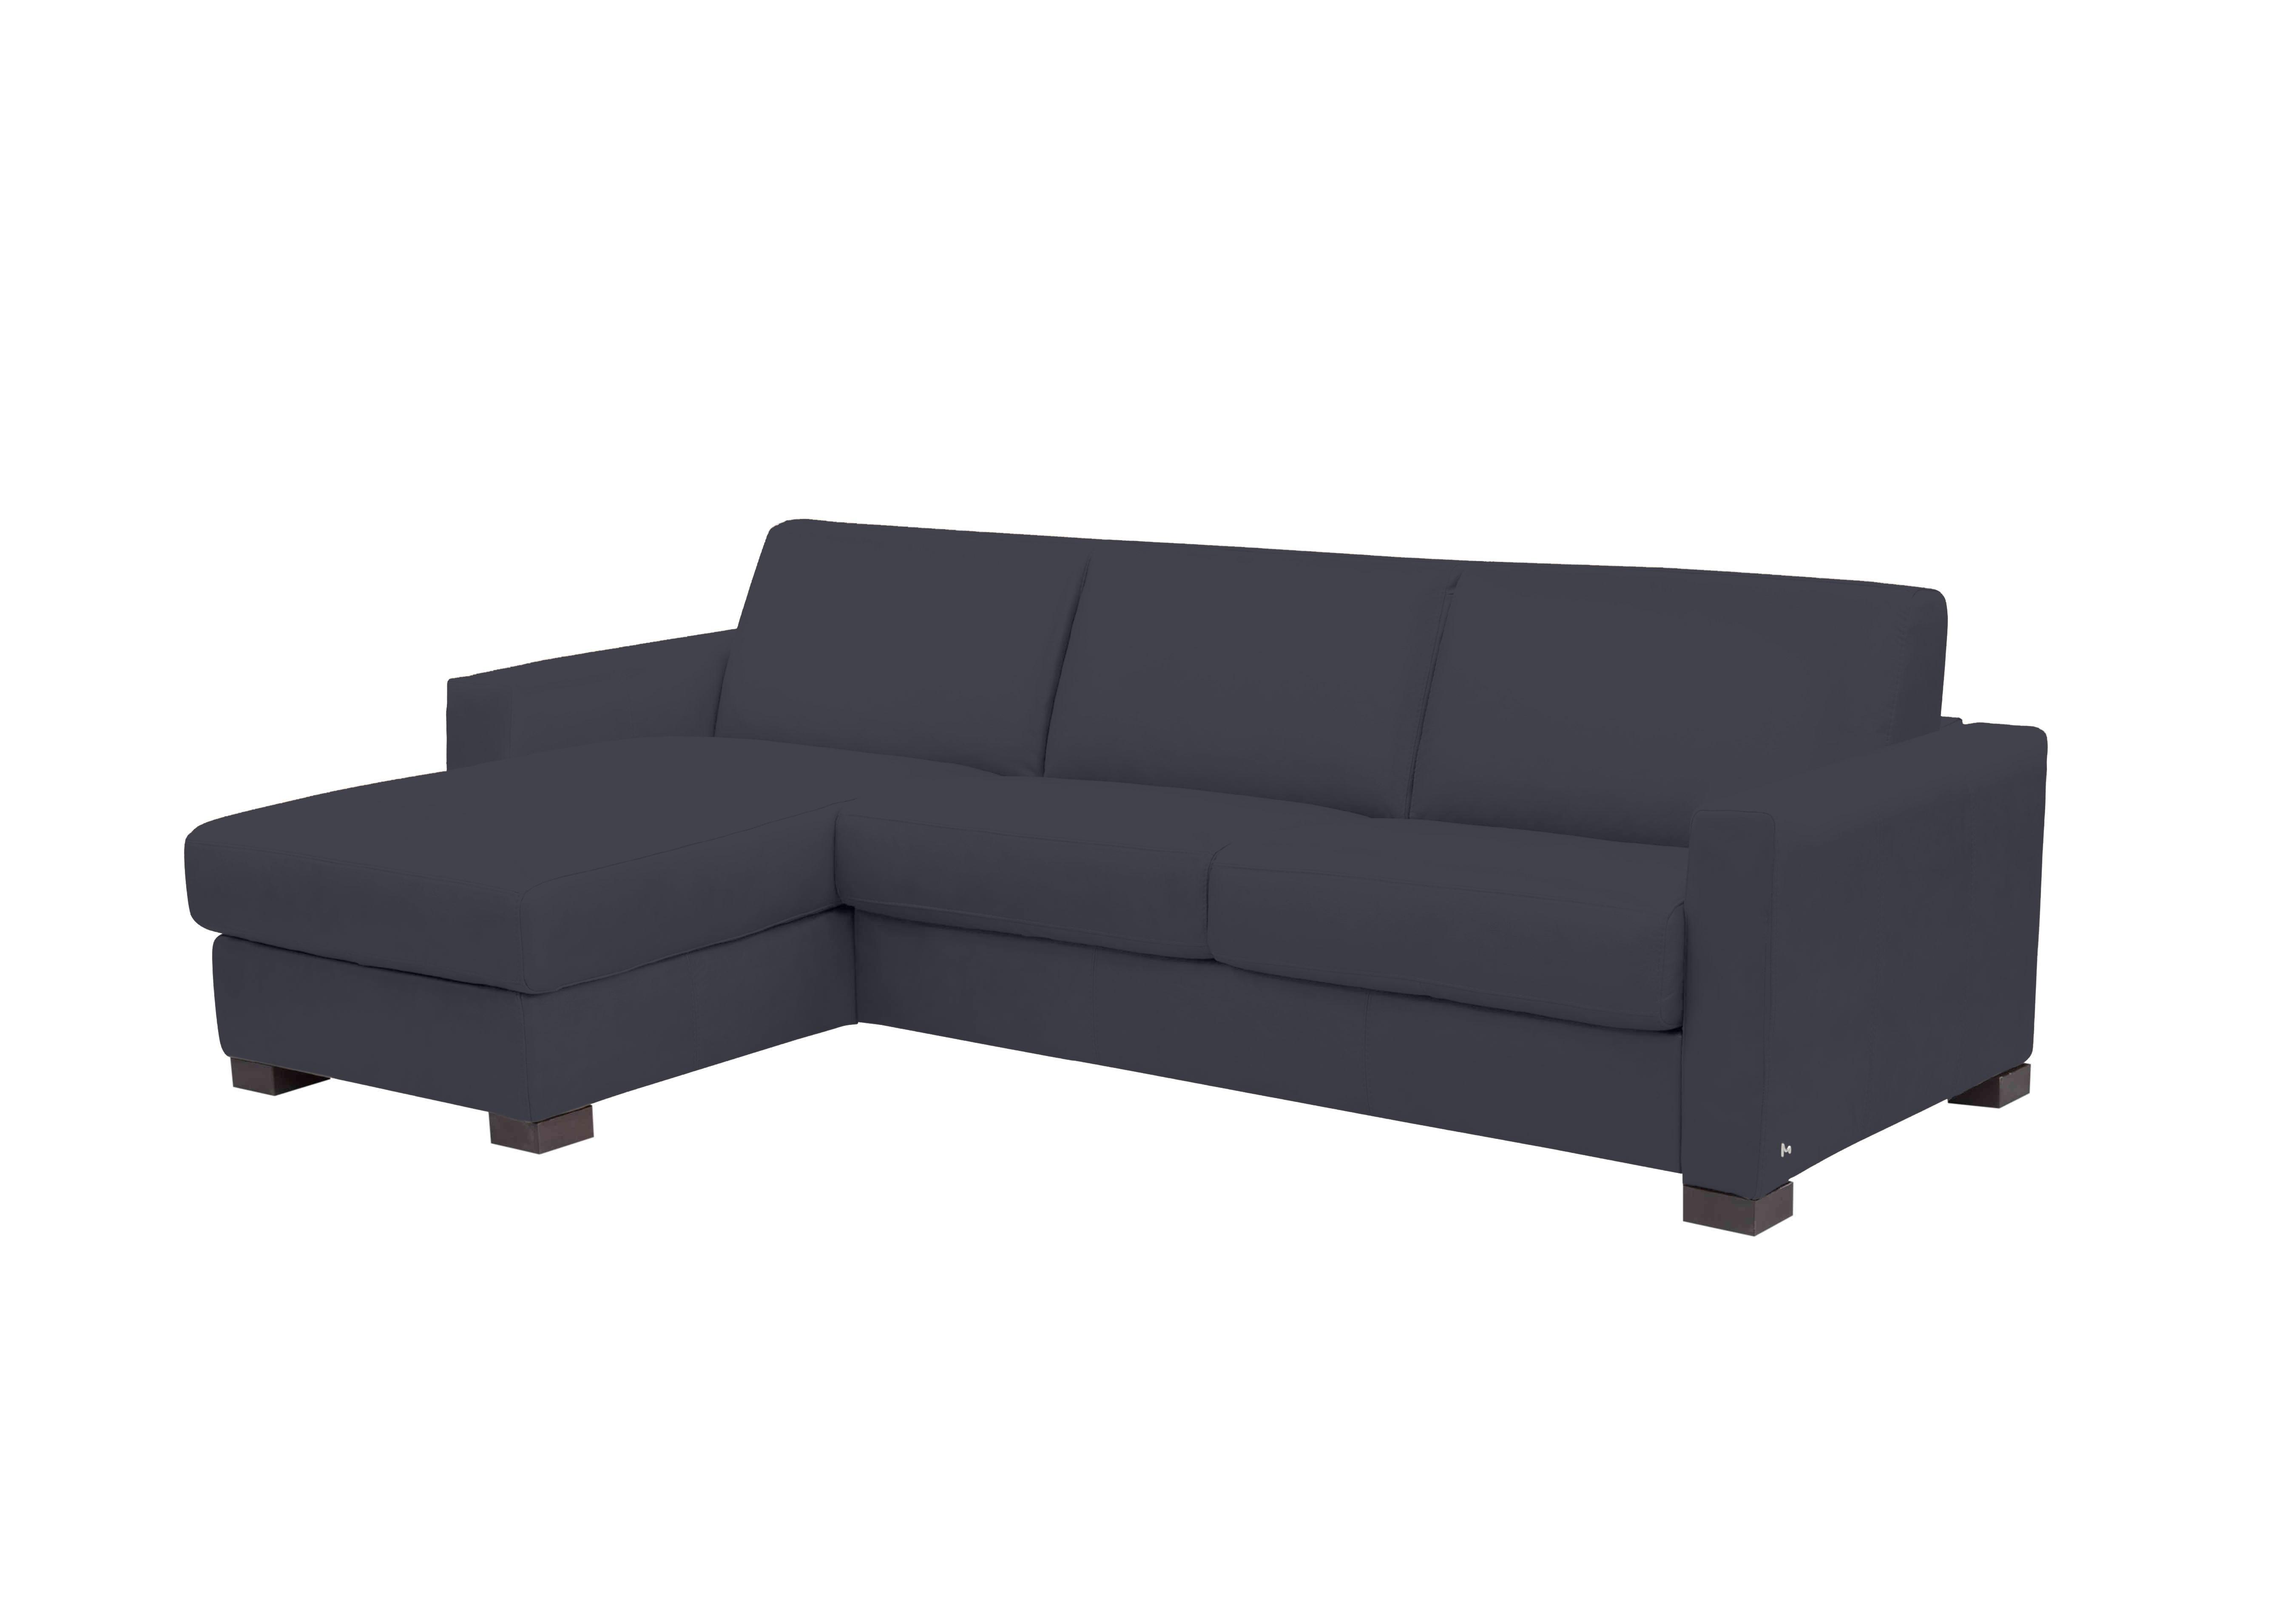 Alcova 3 Seater Leather Sofa Bed with Storage Chaise and Box Arms in Torello Blu 81 on Furniture Village